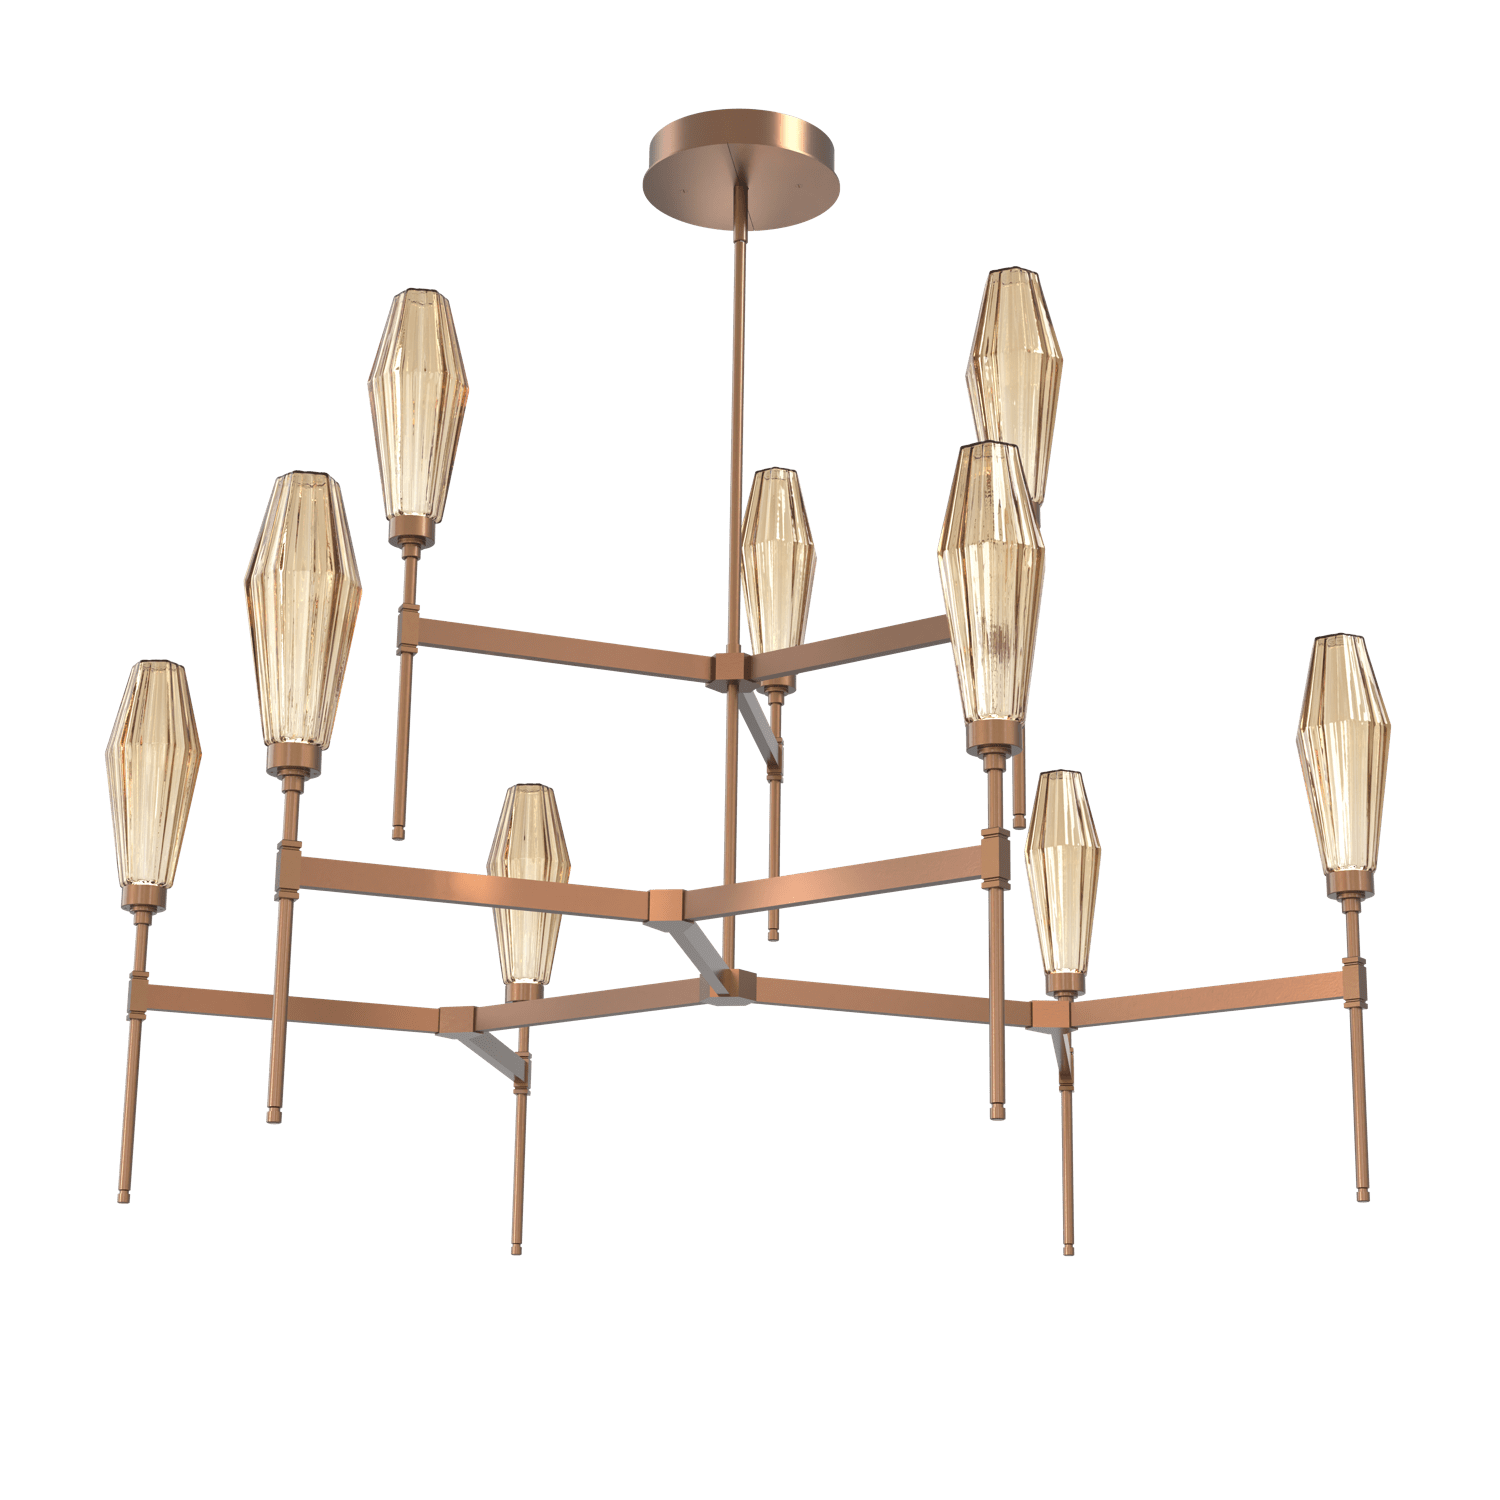 CHB0049-54-BB-RB-Hammerton-Studio-Aalto-54-inch-round-two-tier-belvedere-chandelier-with-burnished-bronze-finish-and-optic-ribbed-bronze-glass-shades-and-LED-lamping